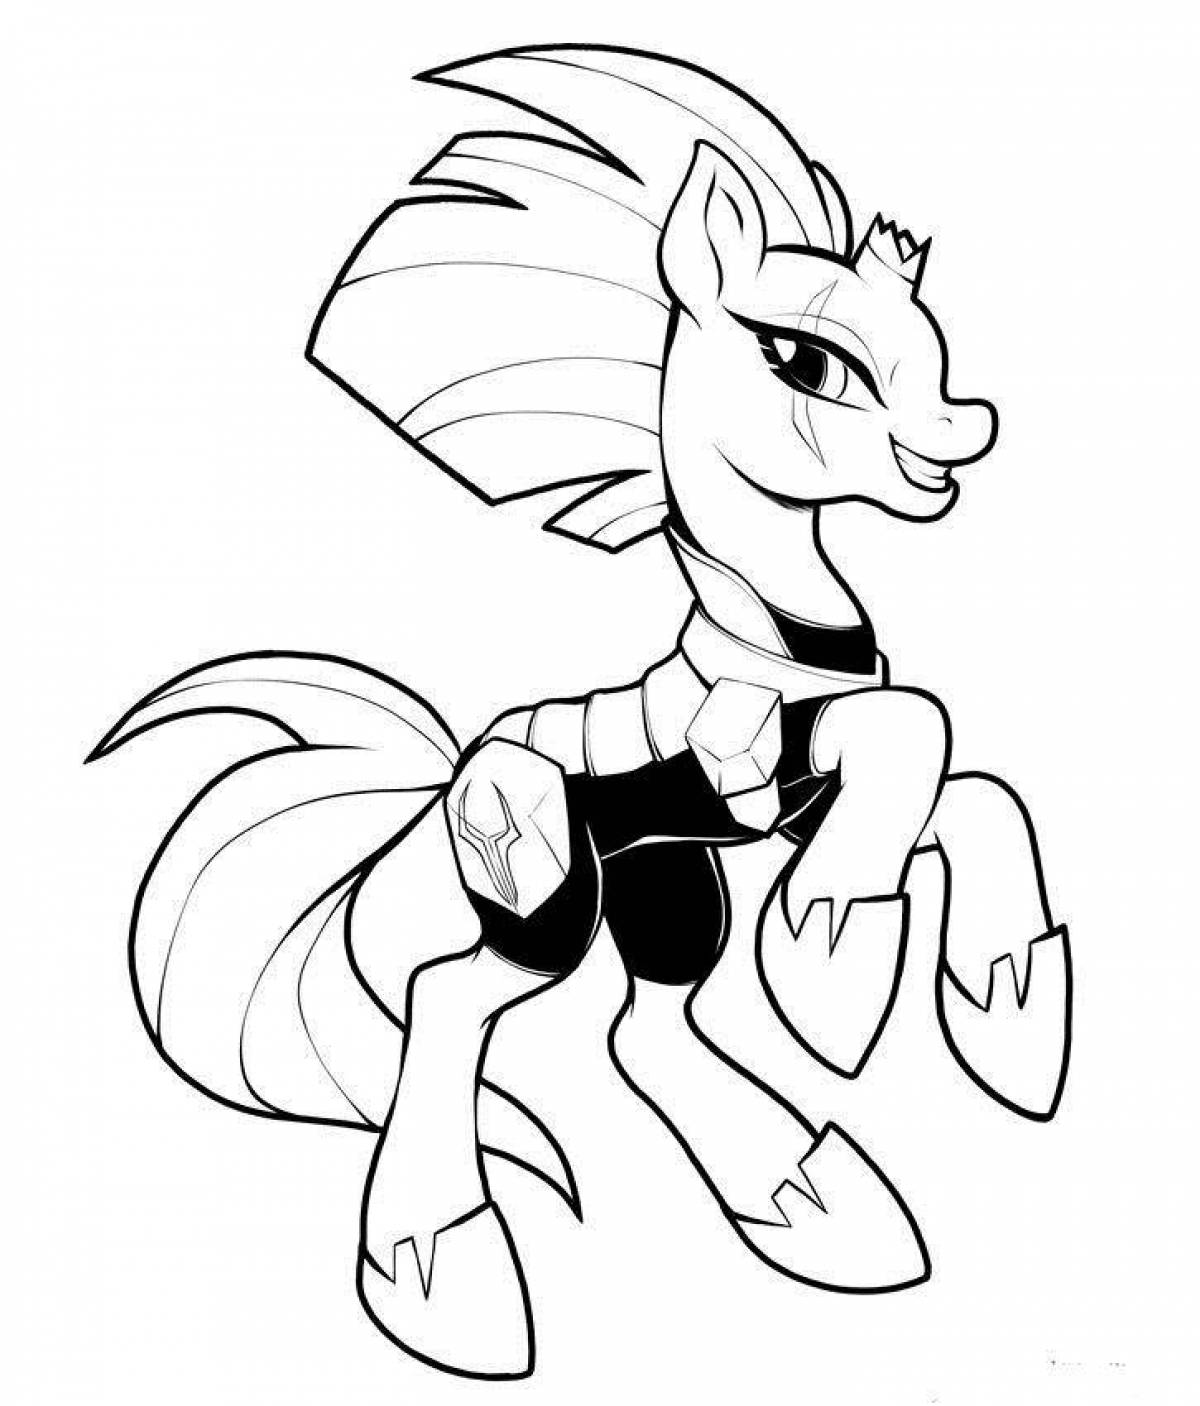 Brilliant pony light coloring page